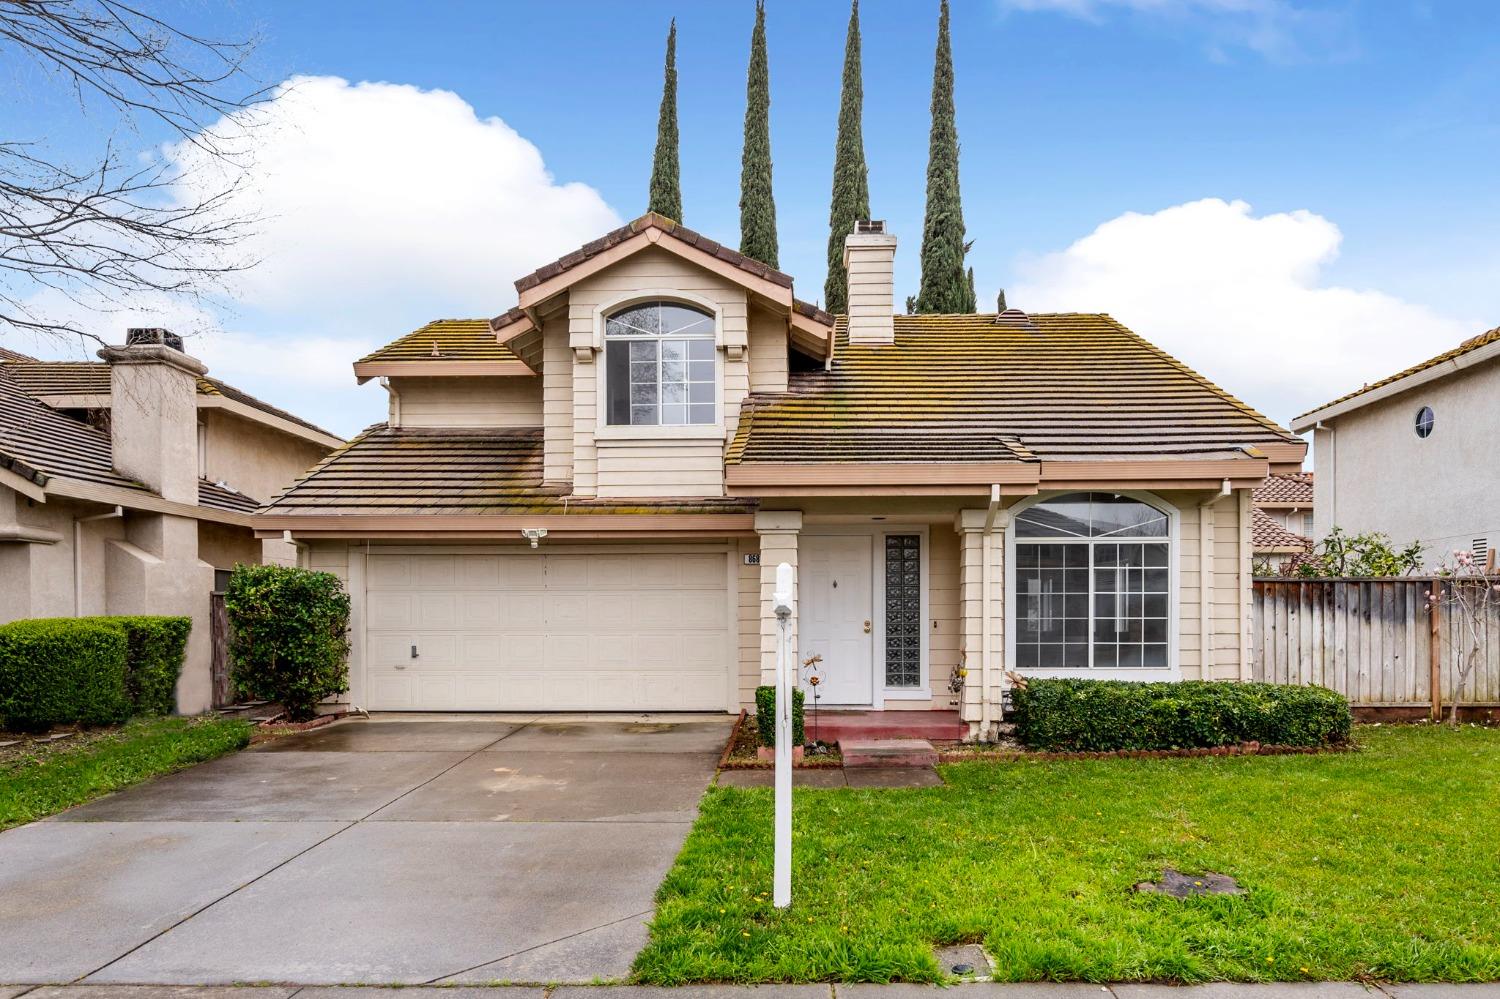 Photo of 868 Williams St in Tracy, CA